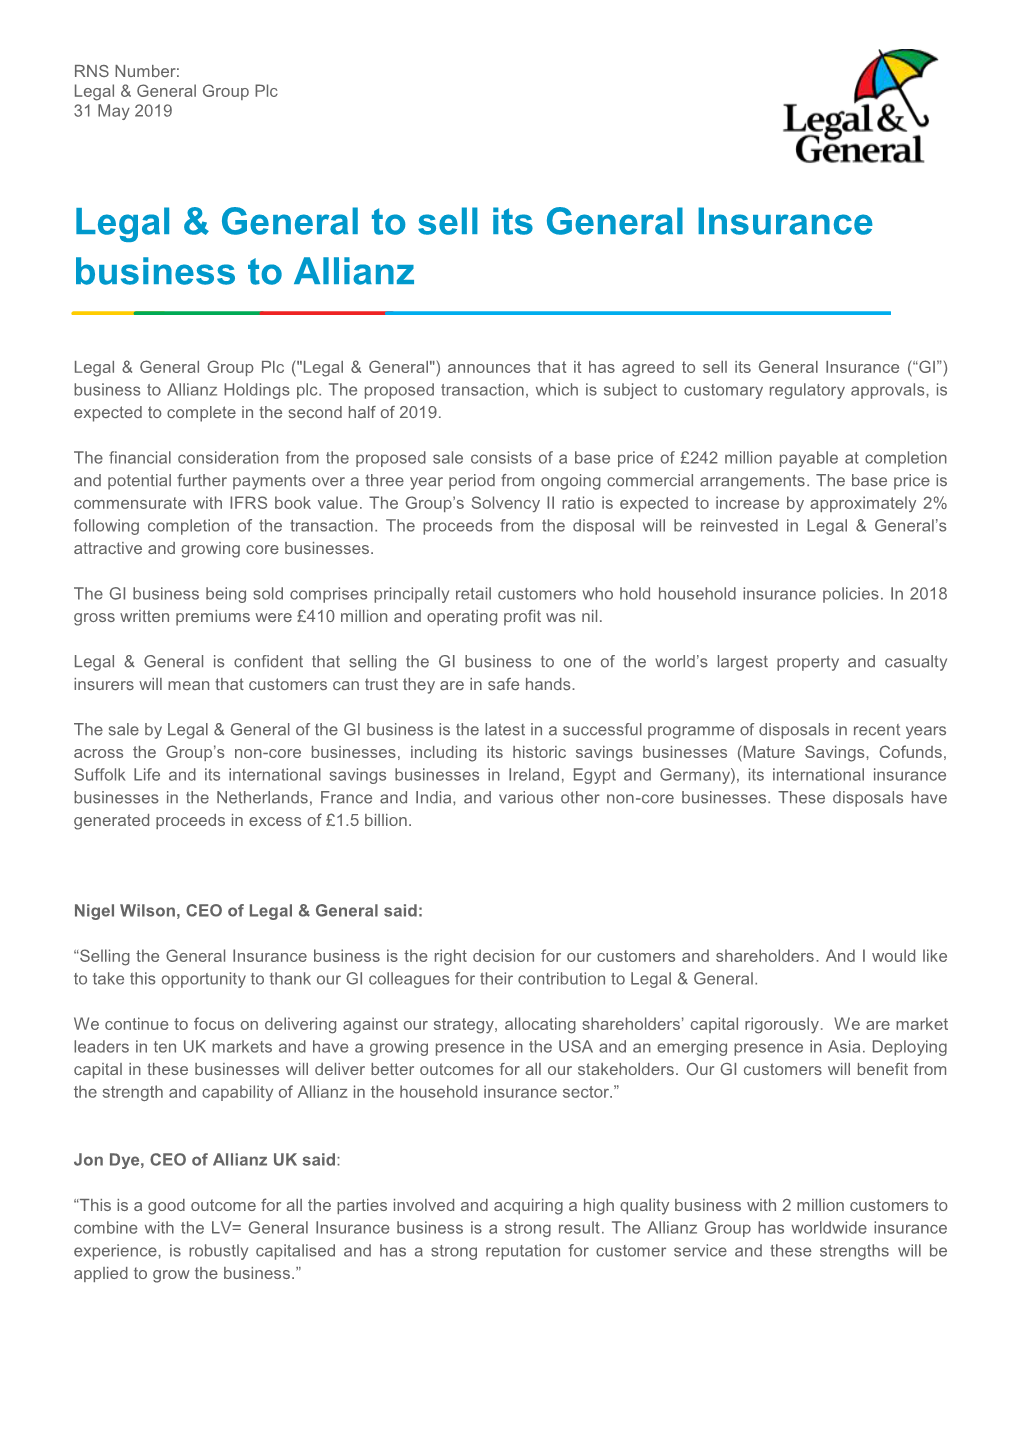 Legal & General to Sell Its General Insurance Business to Allianz